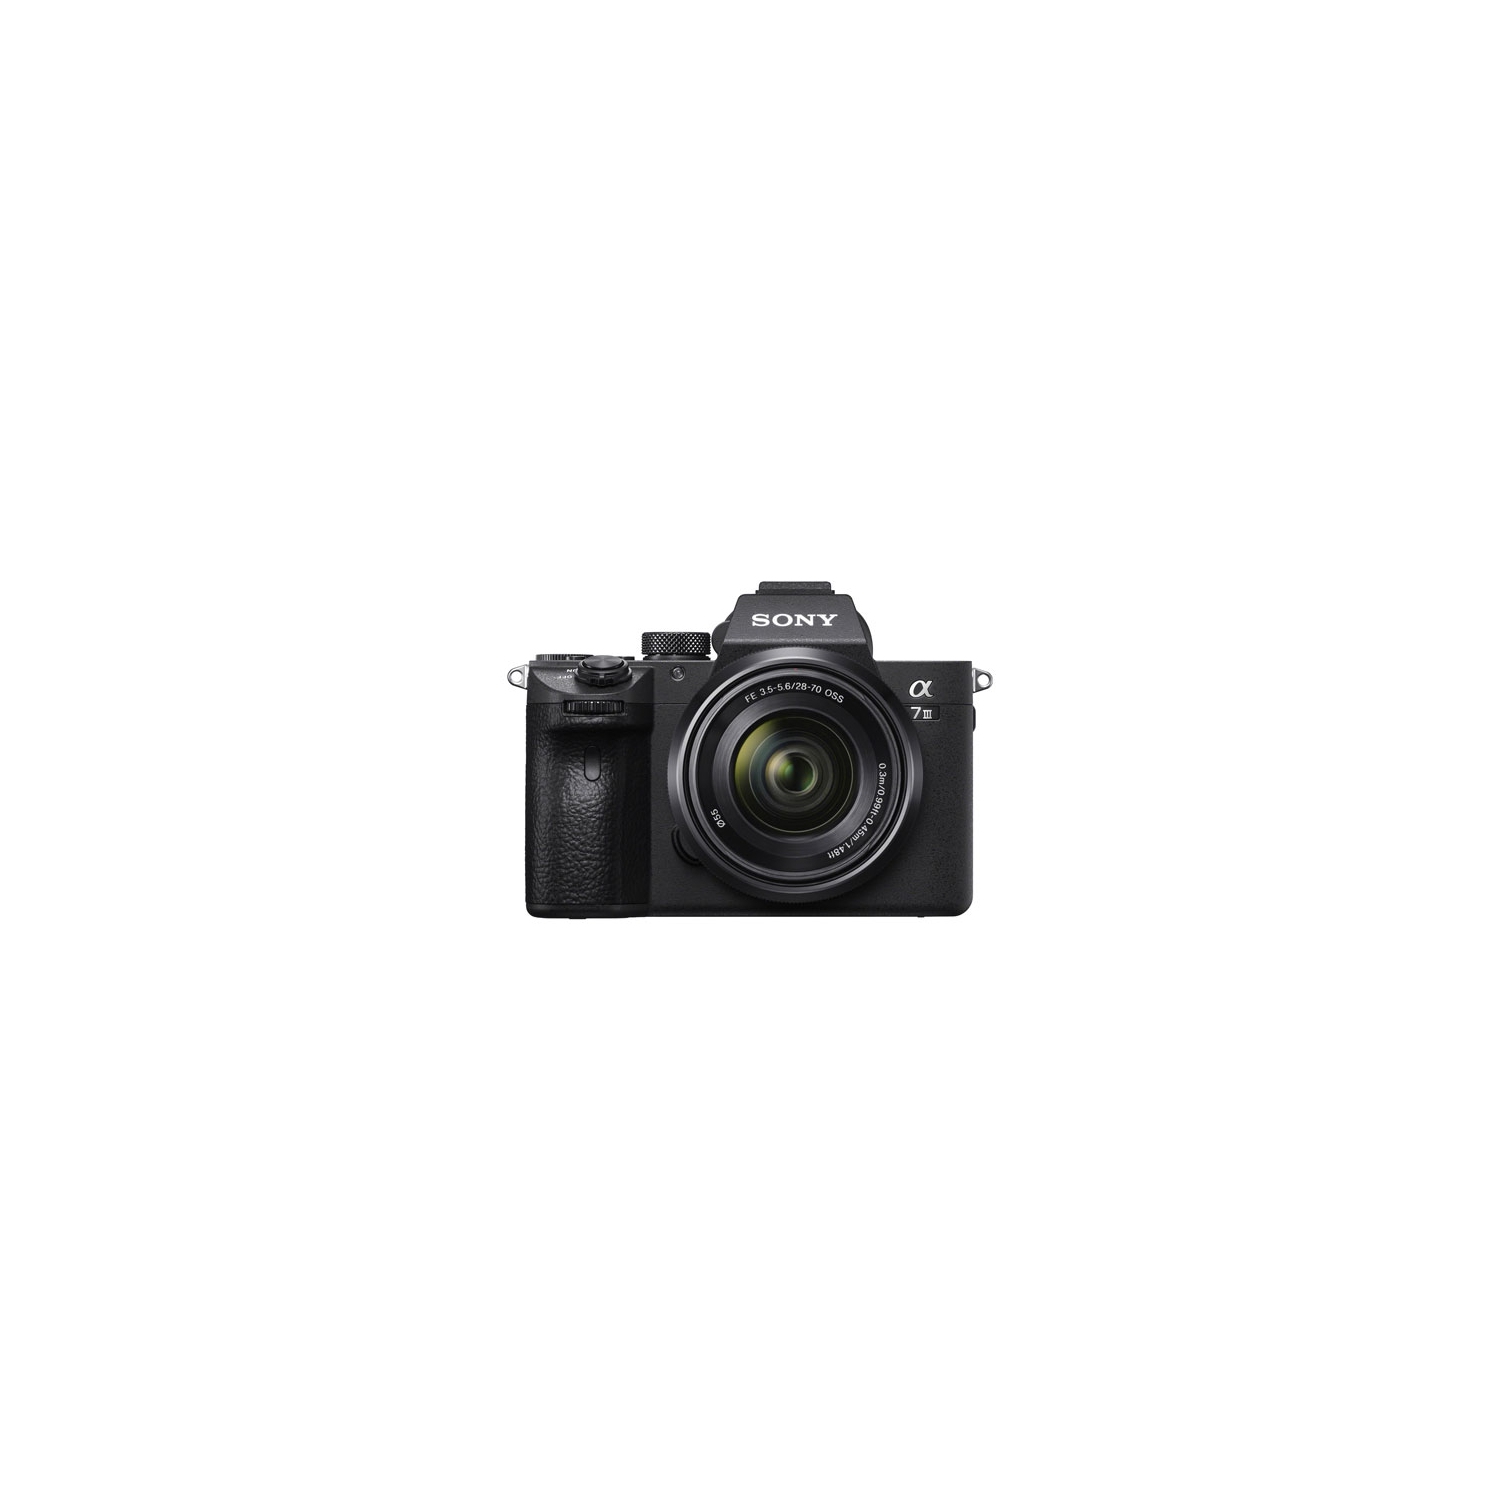 Refurbished (Excellent) - Sony Alpha a7 III Full-Frame Mirrorless Vlogger Camera with 28-70mm OSS Lens Kit